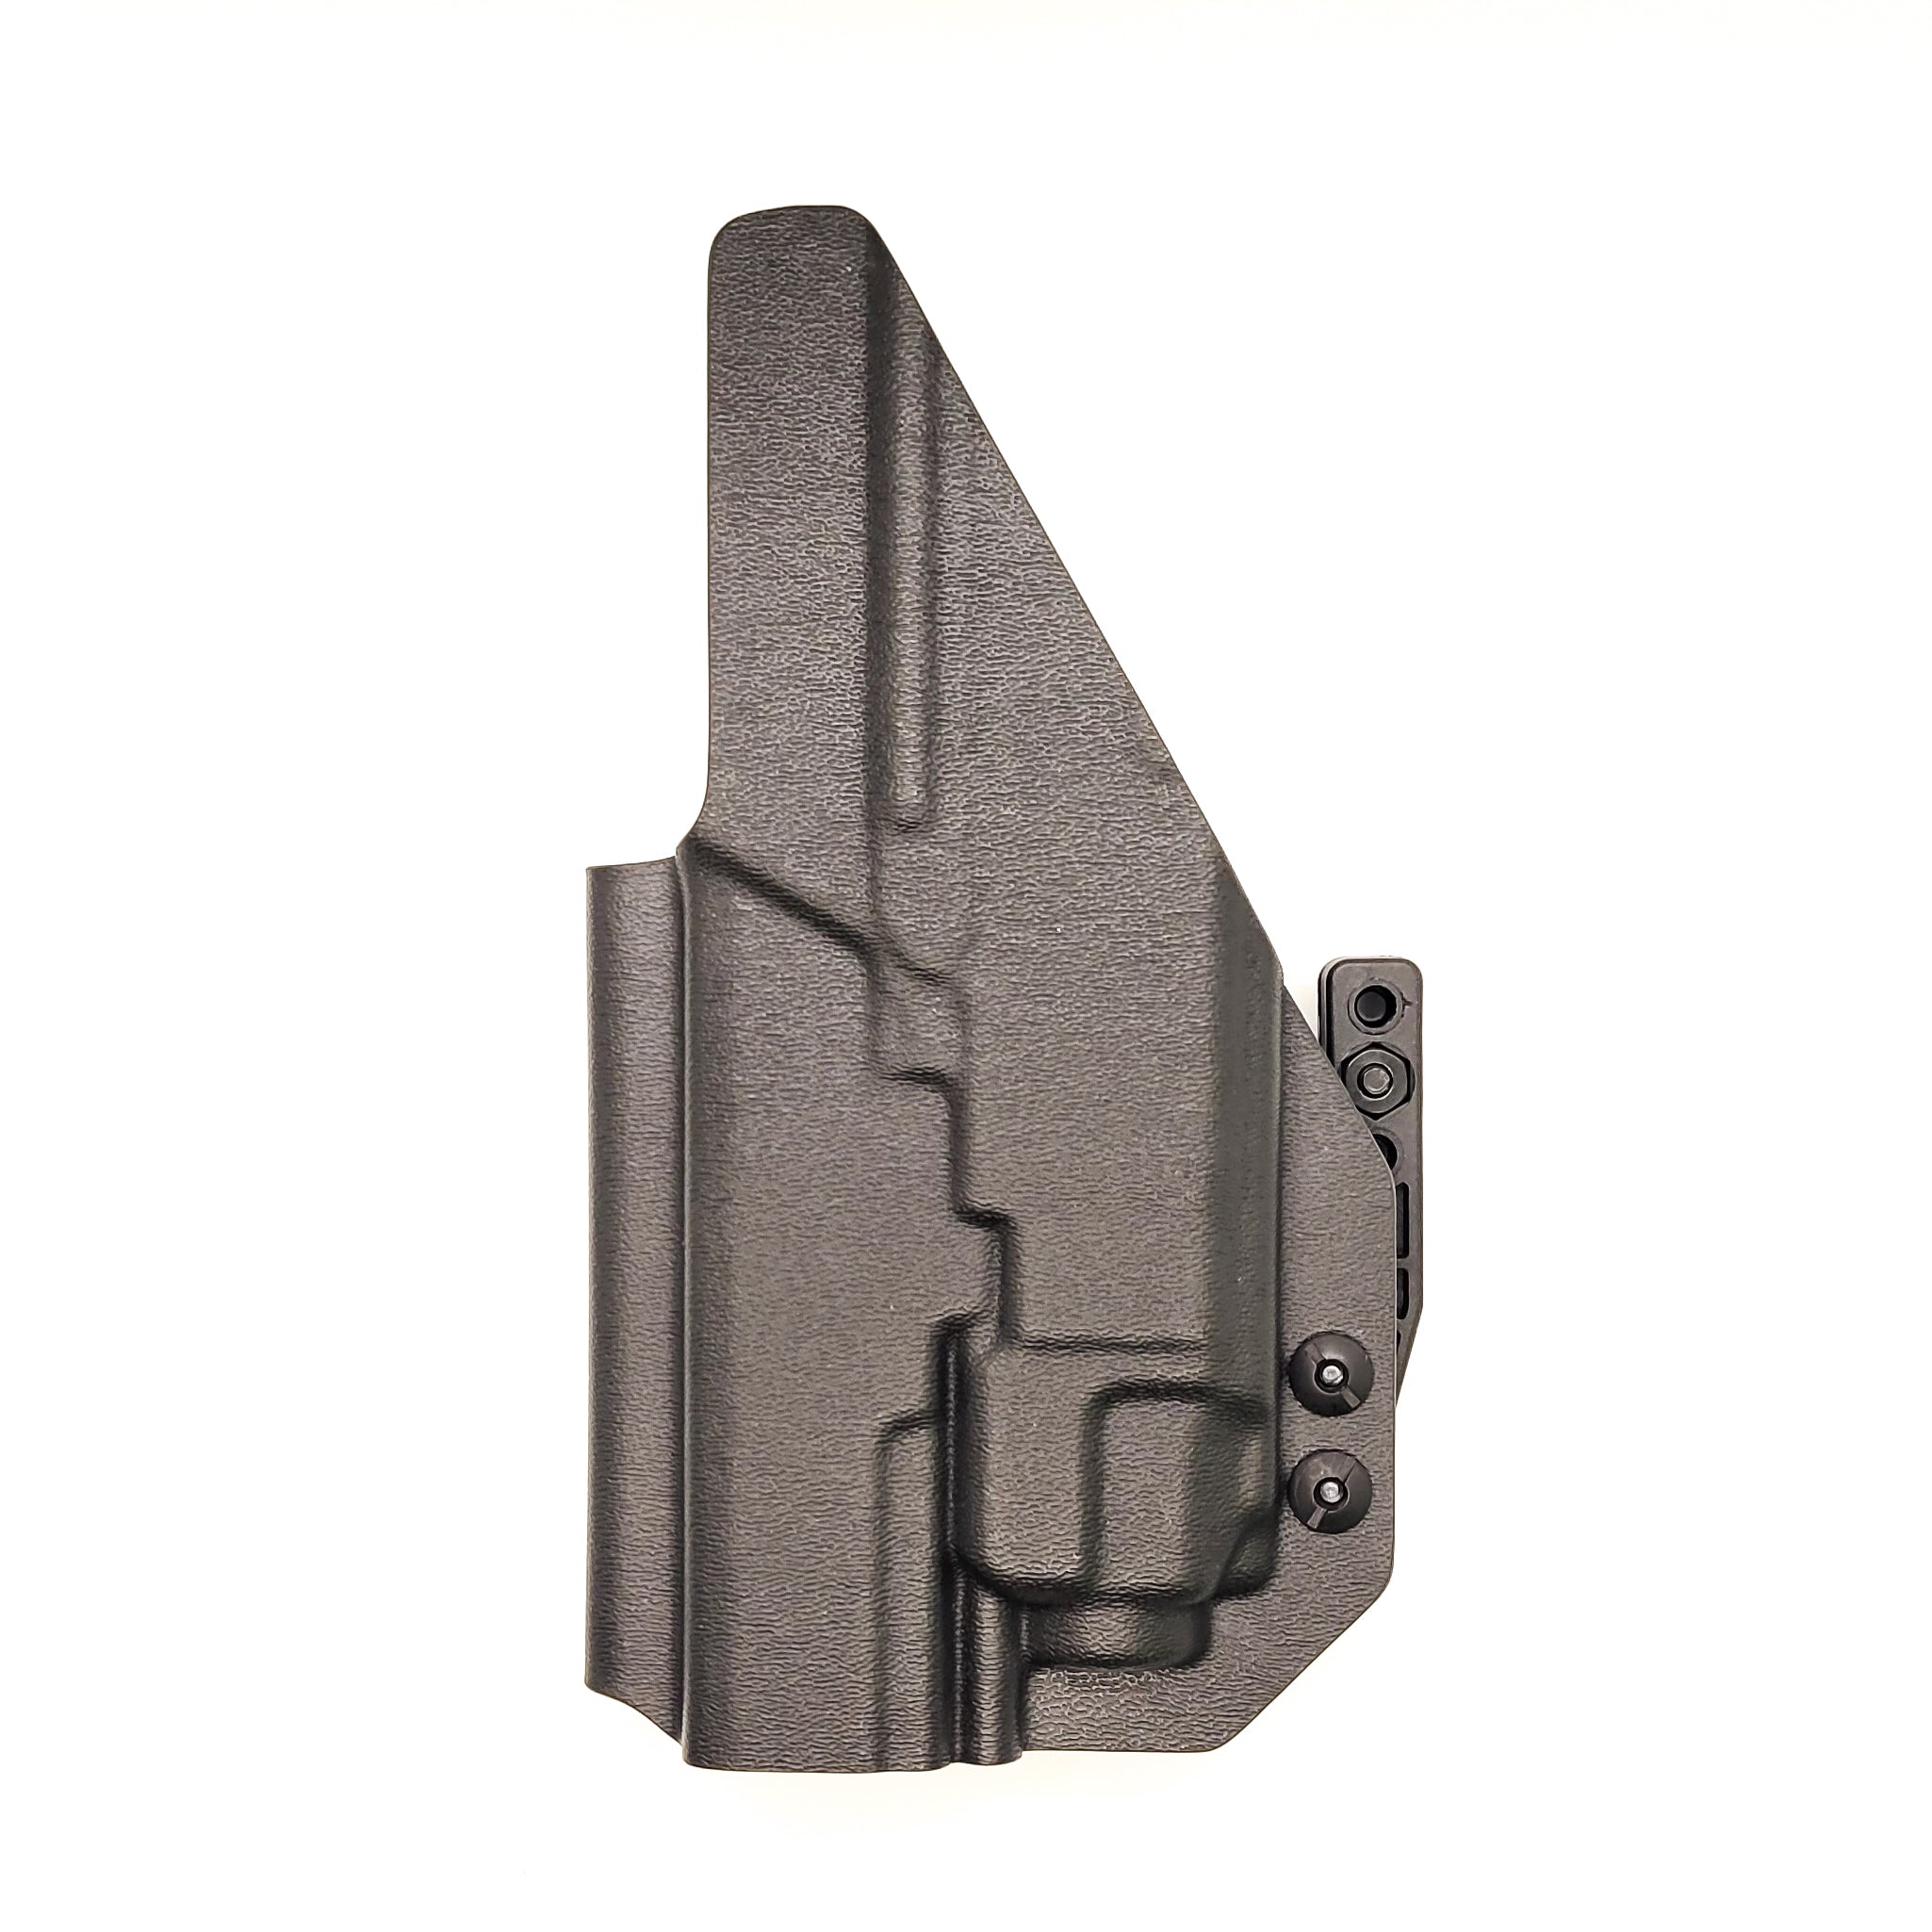 For the best concealed carry Inside Waistband IWB AIWB Holster designed to fit the Walther PDP Pro SD Compact 4.6" pistol with a 4" slide and 4.6" threaded barrel and Streamlight TLR-8 or TLR-8A mounted on the firearm, shop Four Brothers Holsters. Cut for red dot sight, sweat guard, adjustable retention & open muzzle 